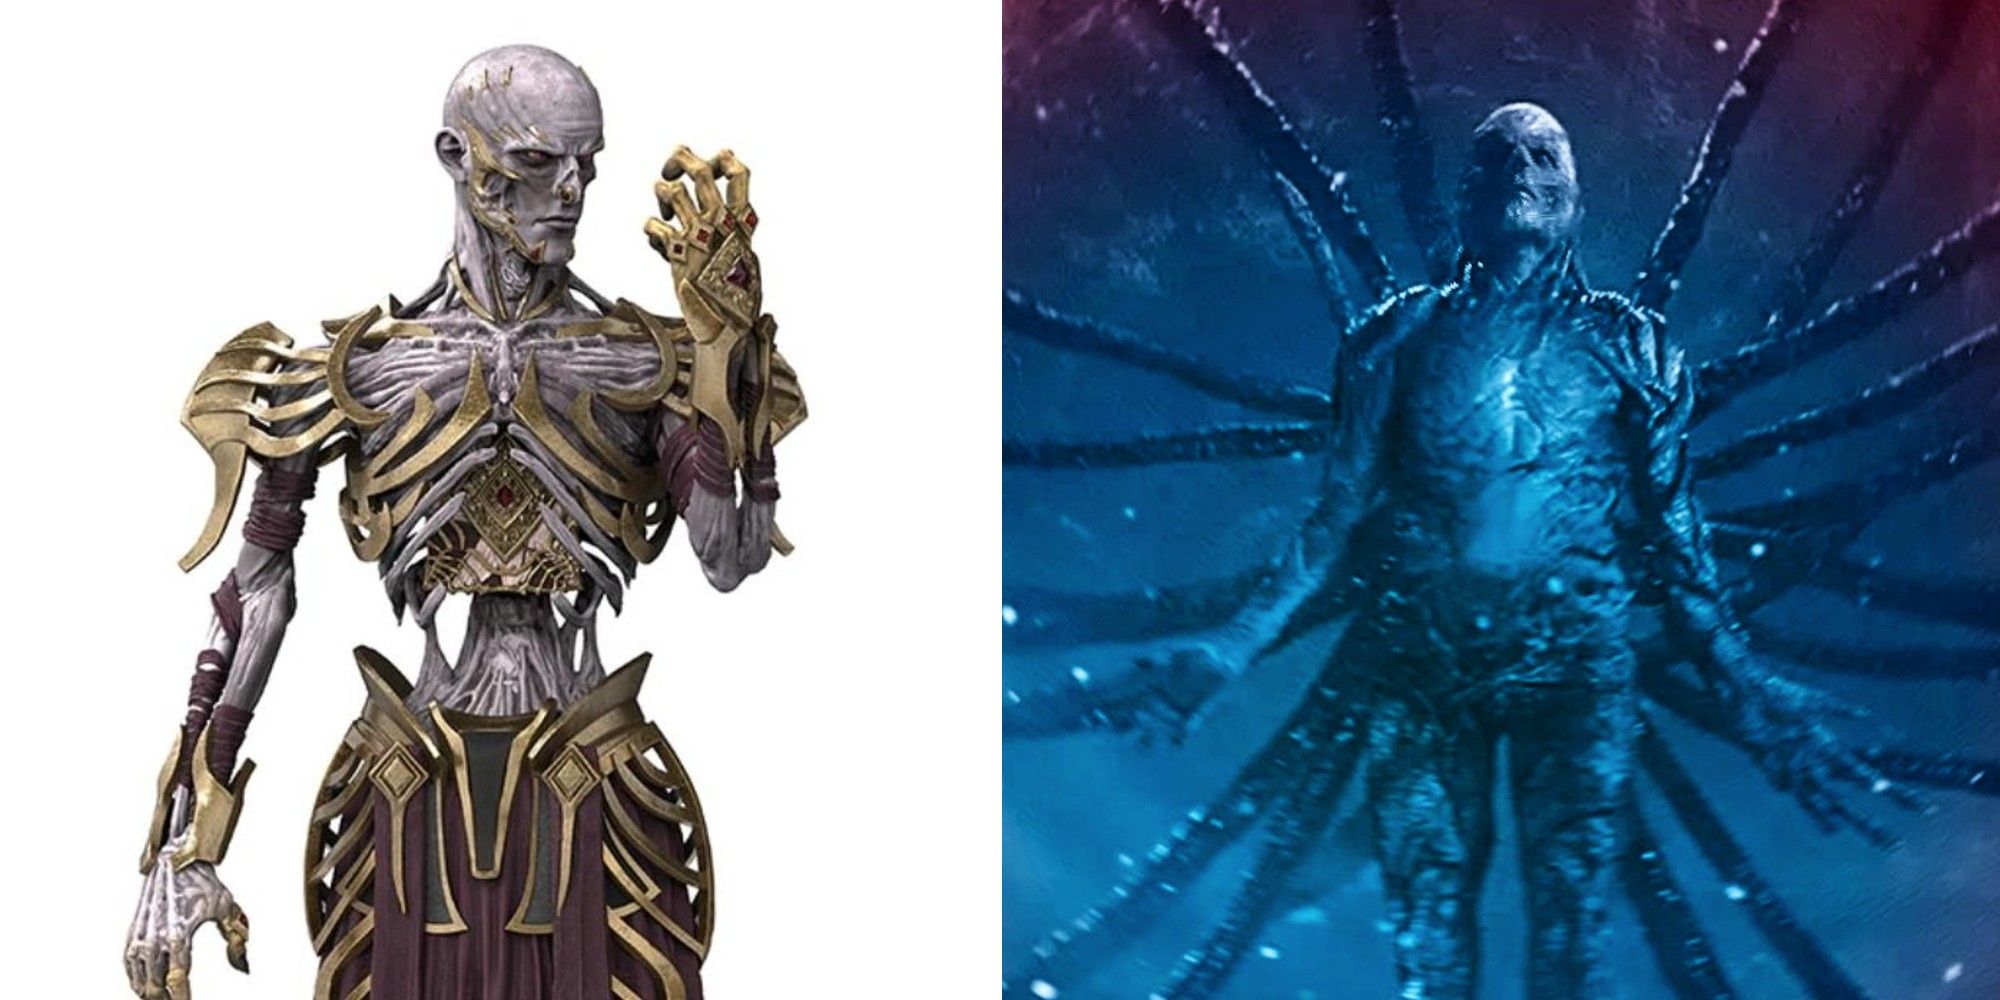 Side-by-side of Stranger Things' Vecna and D&D statuette of Vecna.